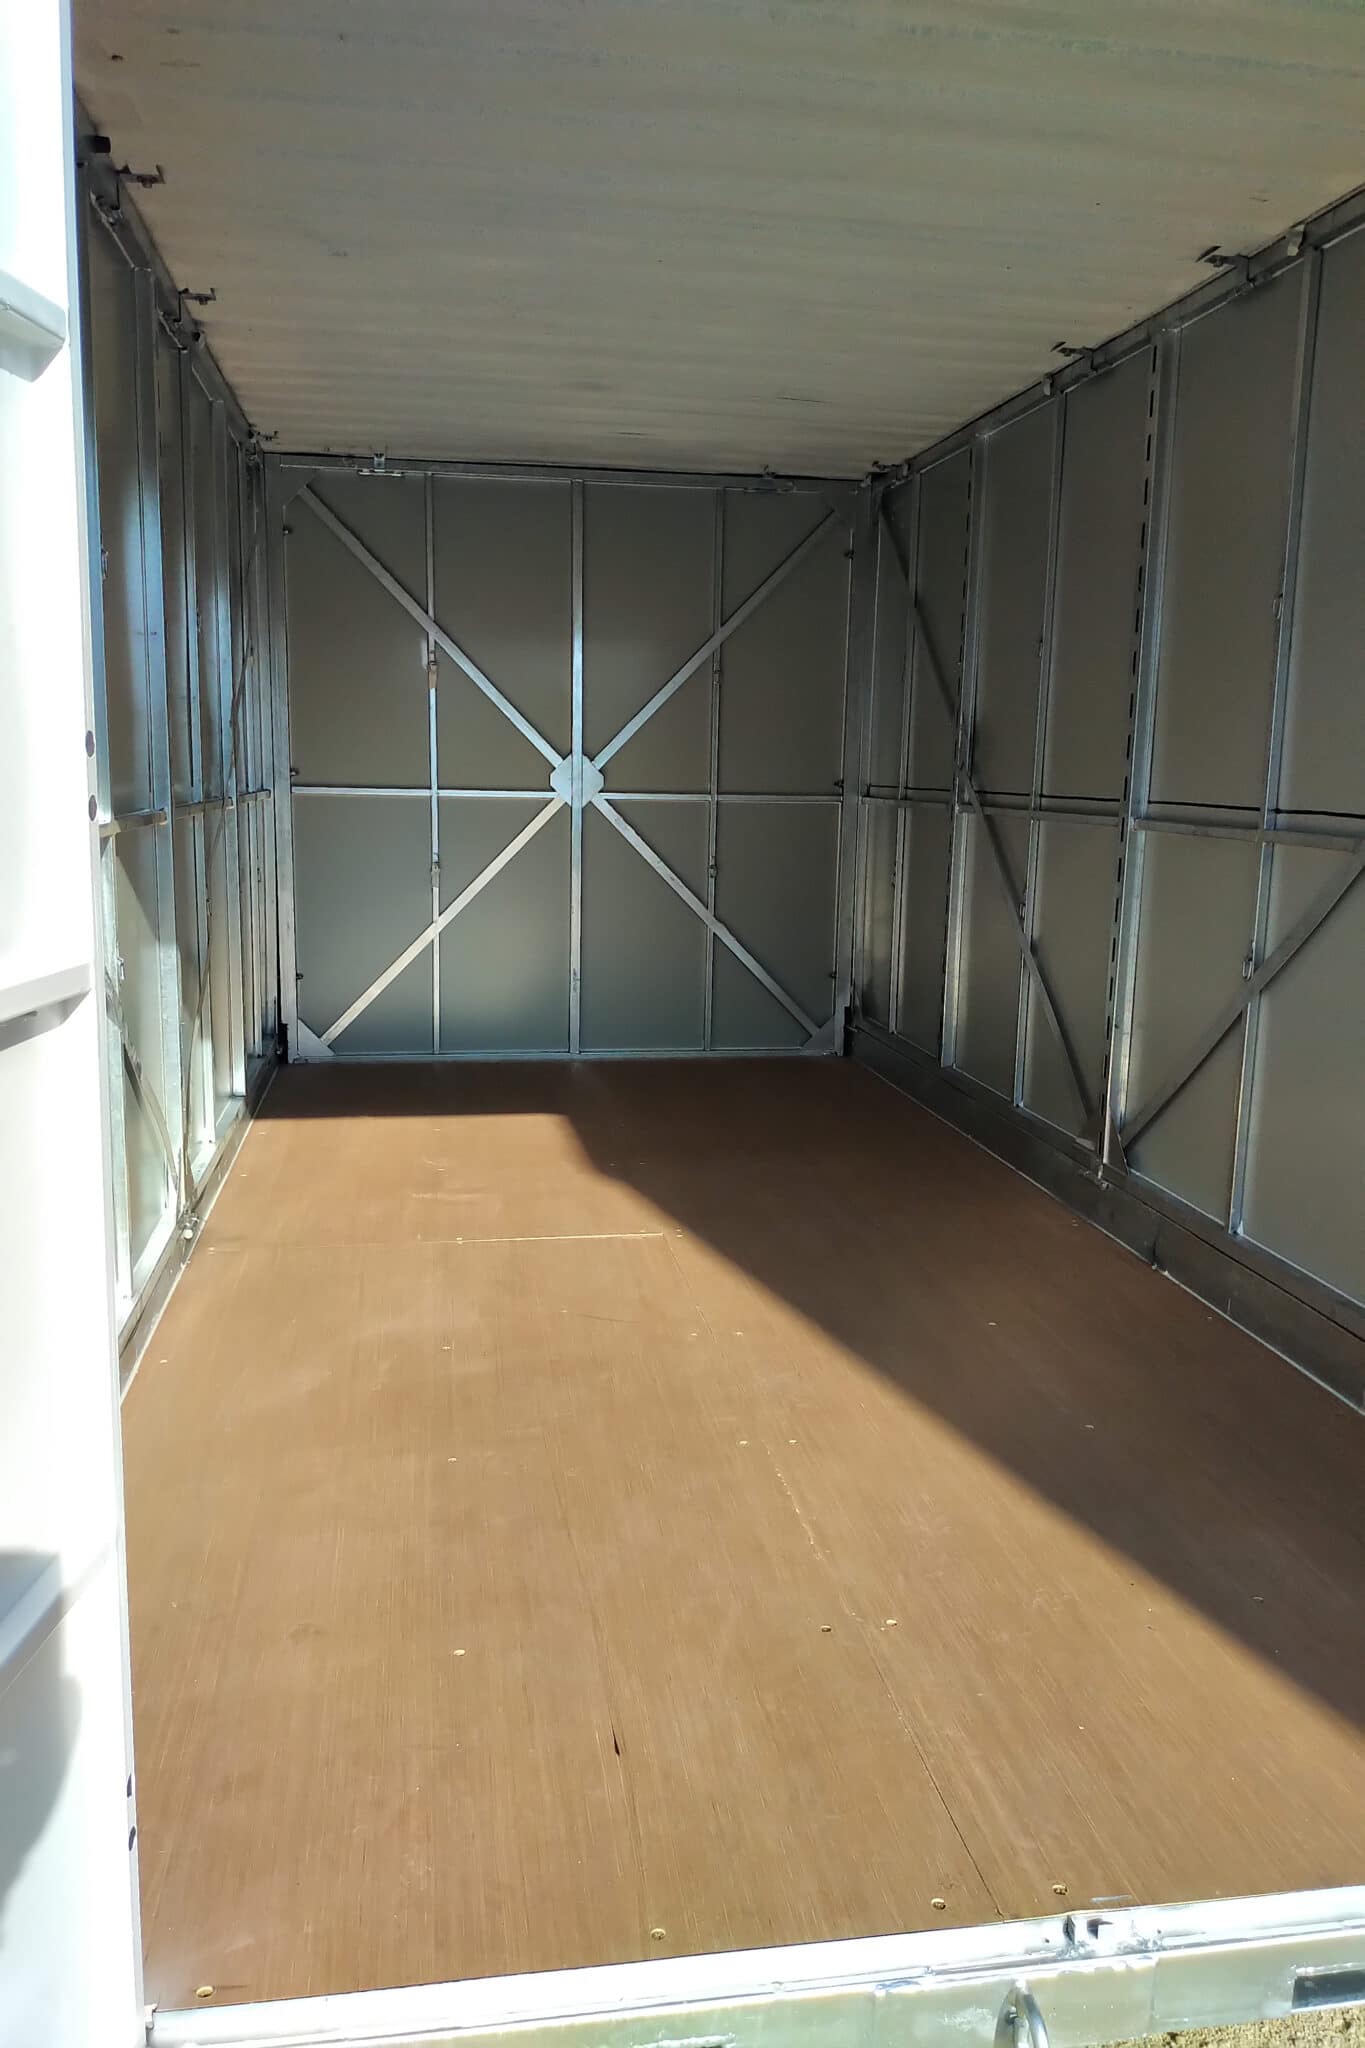 self pack moving containers in whitefish bay, moving containers self pack in witefish bay, whitefish bay self pack containers